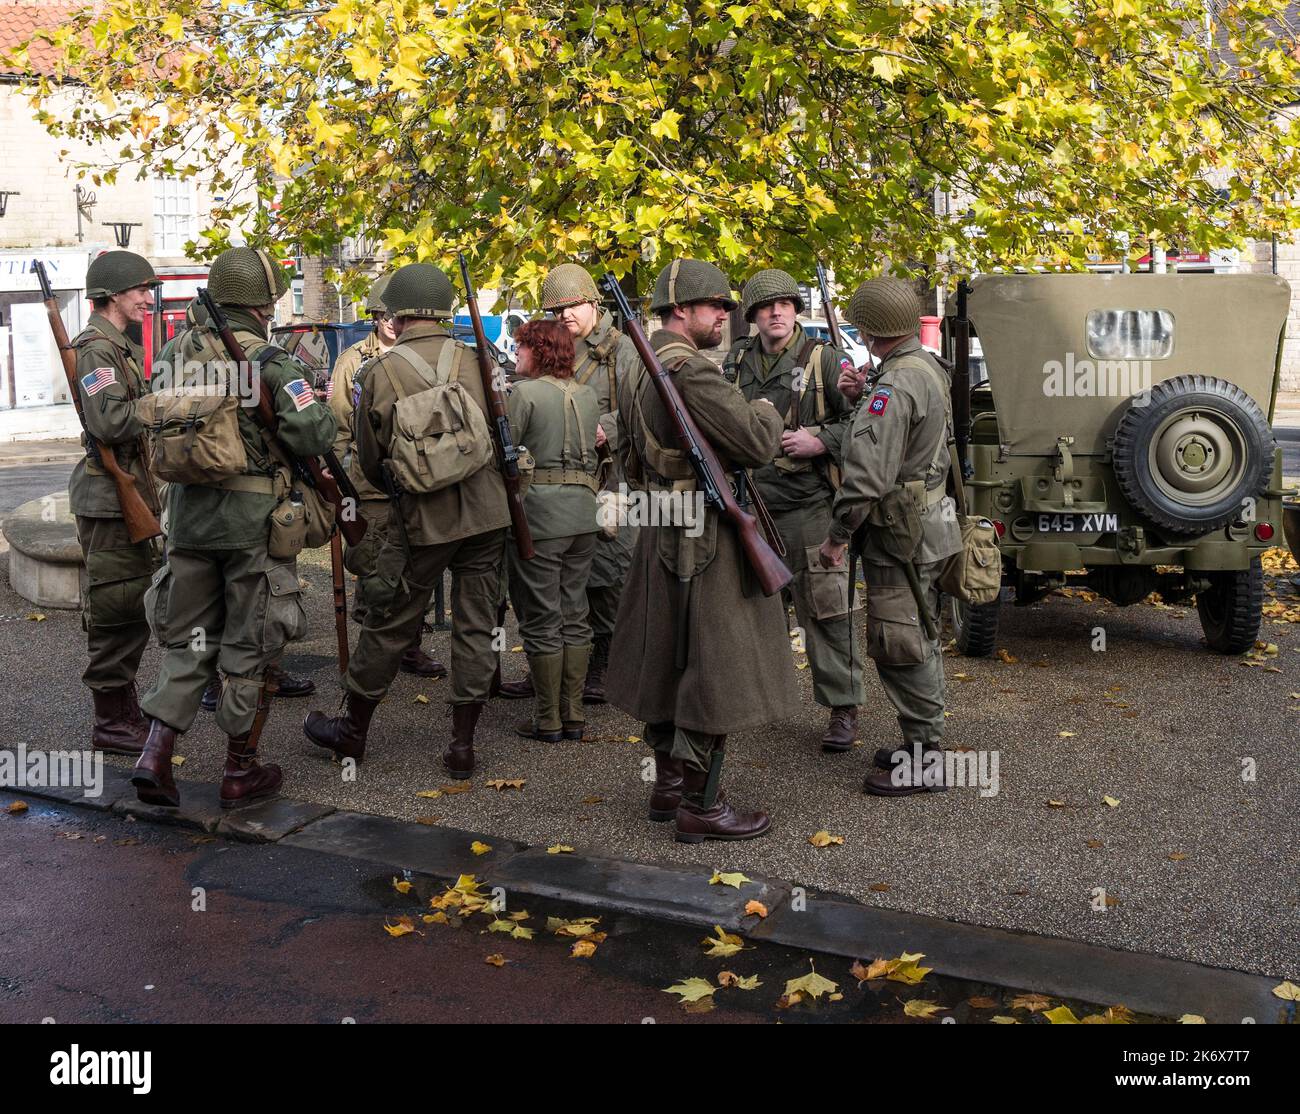 A group of re-enactors of the American 82nd Airborne 505th infantry regiment at the annual poppy appeal event in Bolsover, Derbyshire, England. Stock Photo